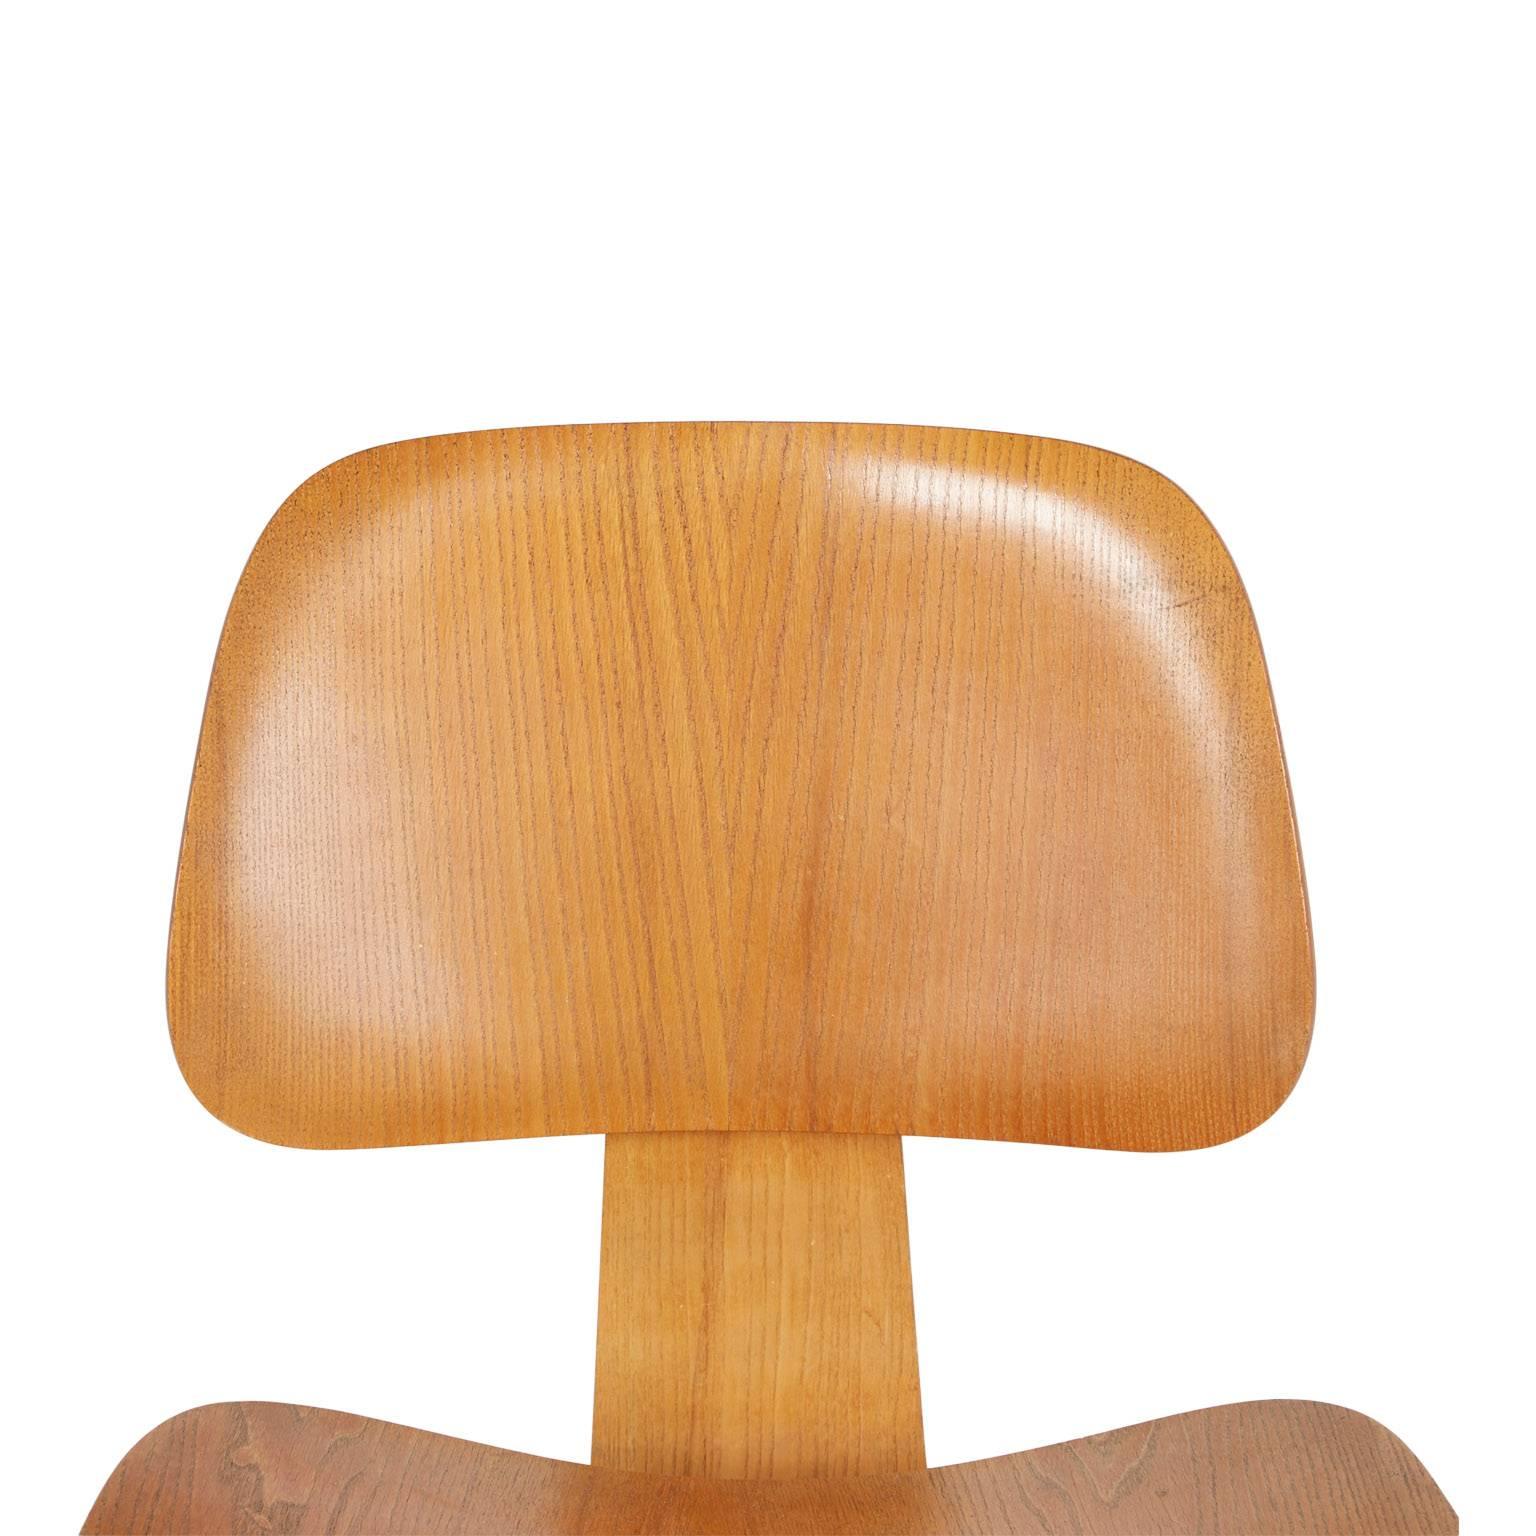 American Evans Rare 1940s DCW Molded Plywood Chairs by Charles and Ray Eames